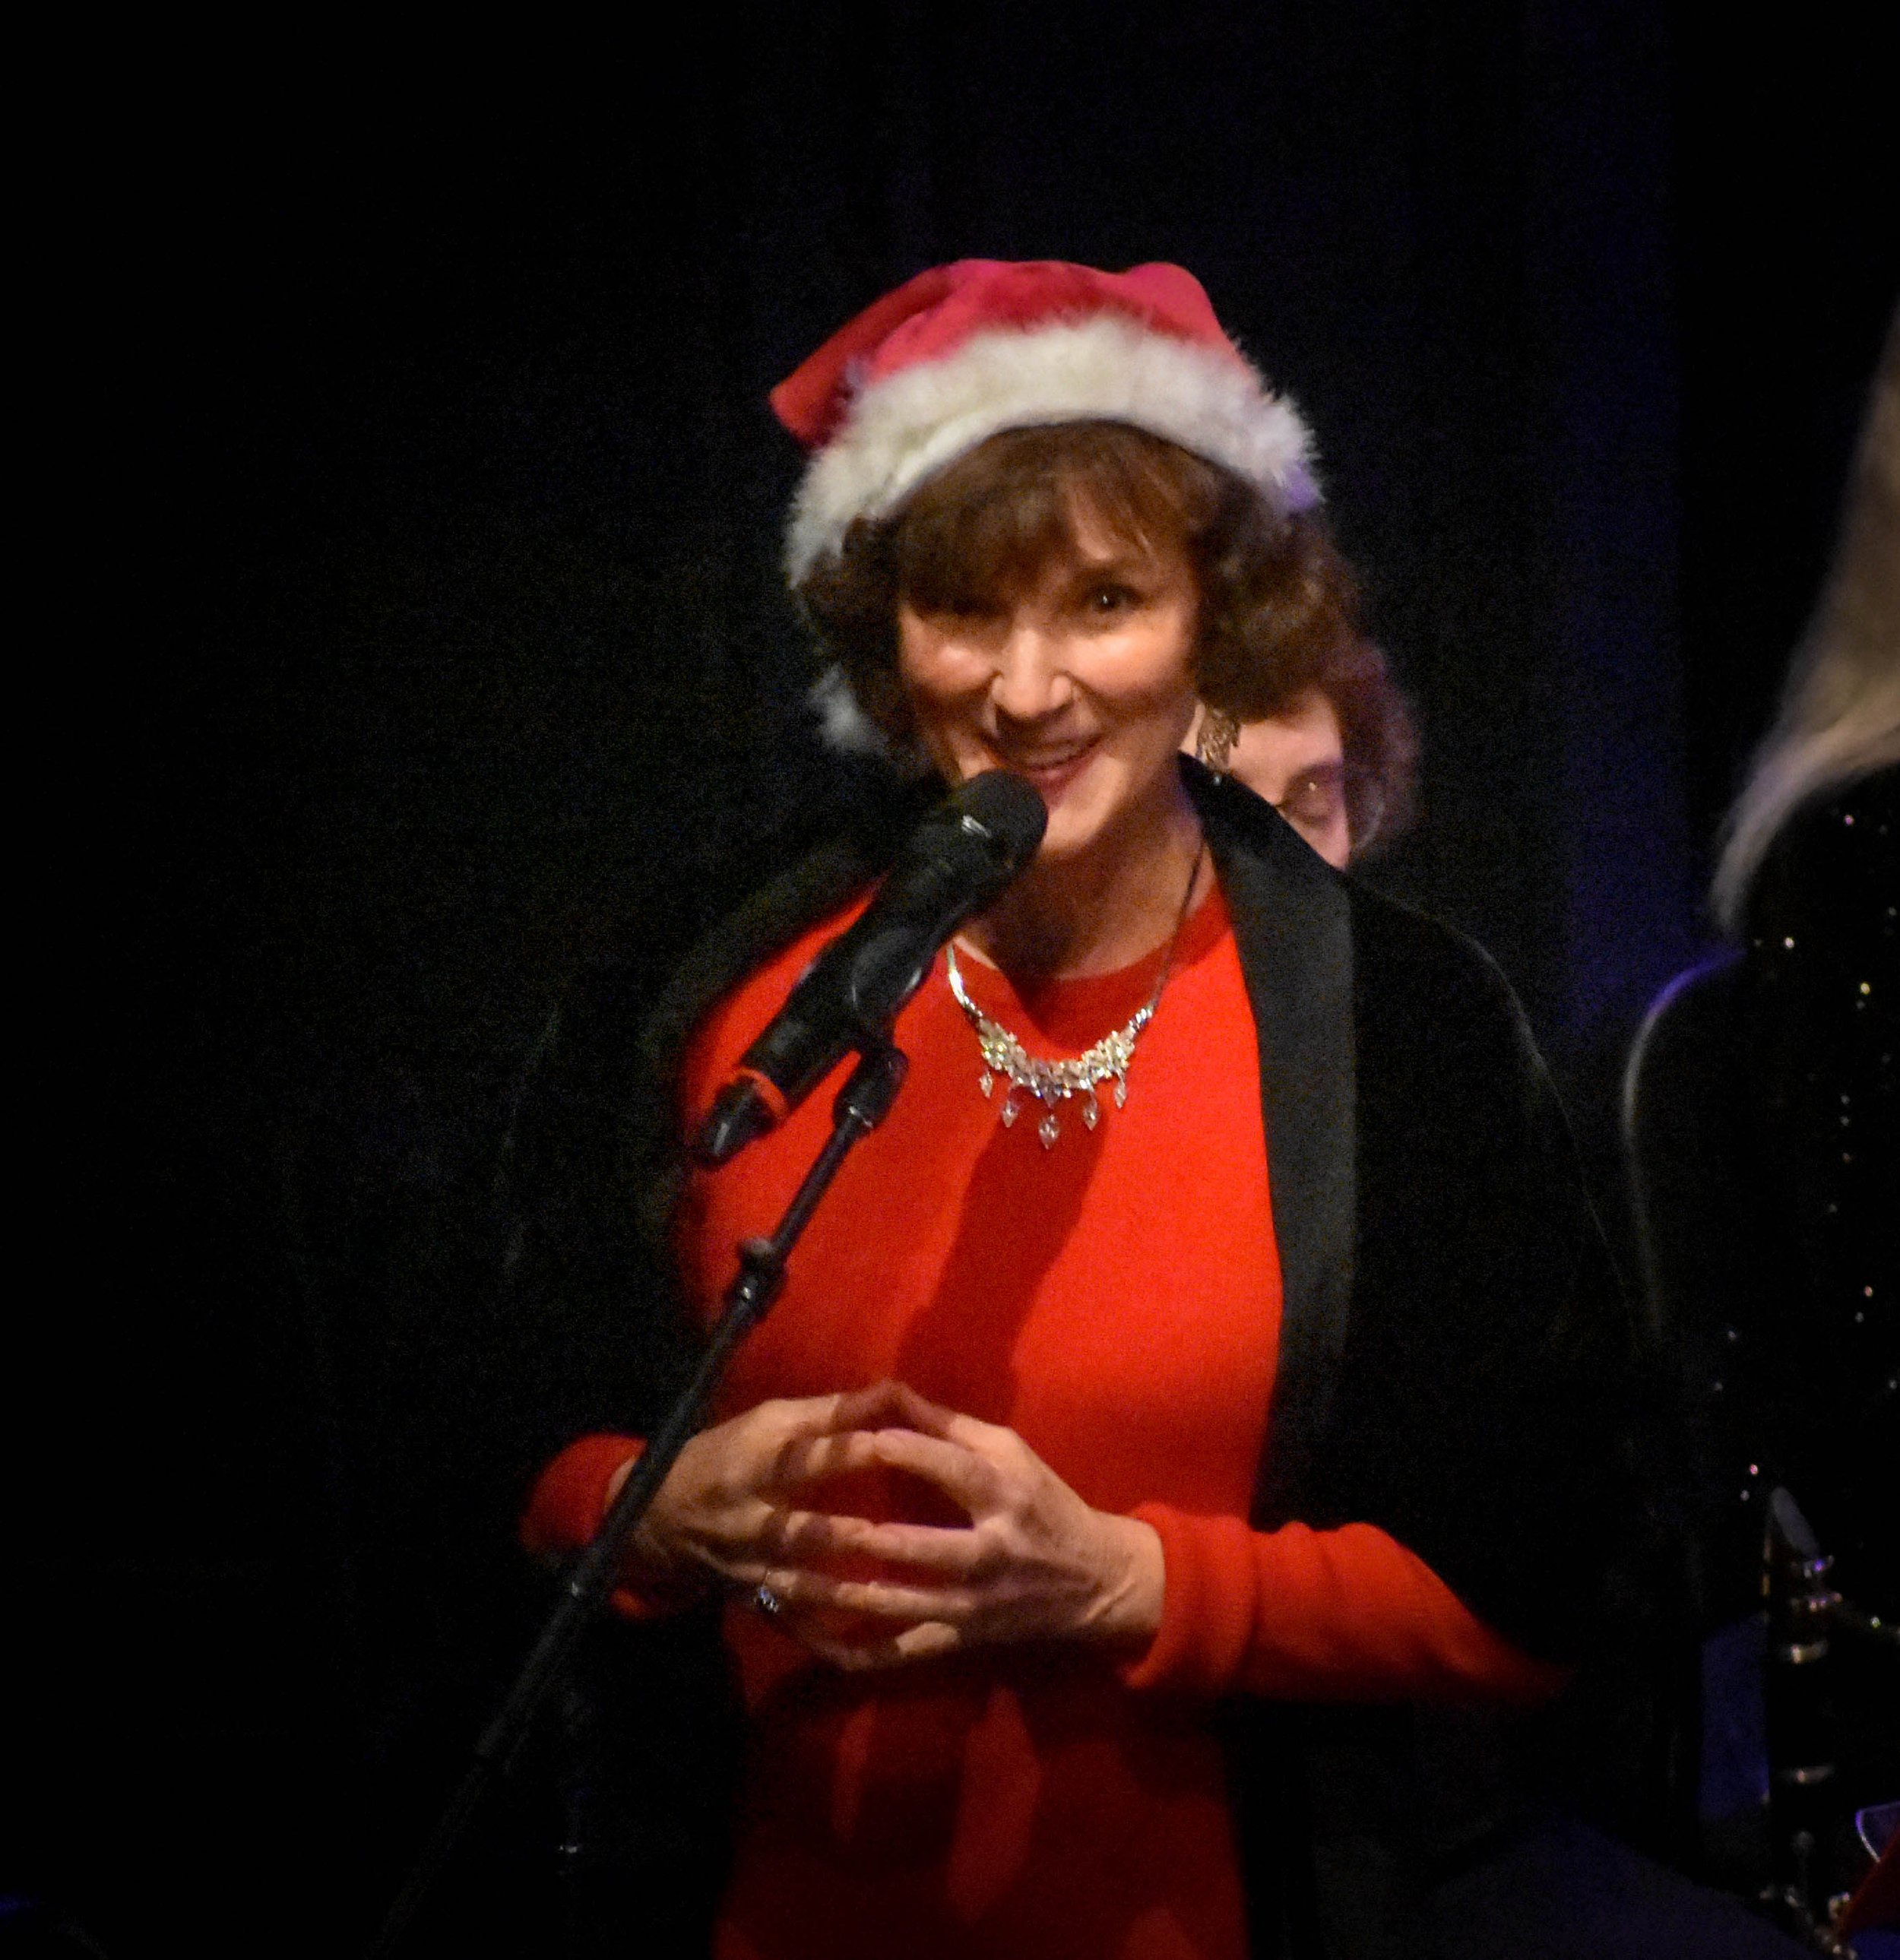 12-19-2021 LCB Holiday Concert by Peyton Webster68-25.jpg